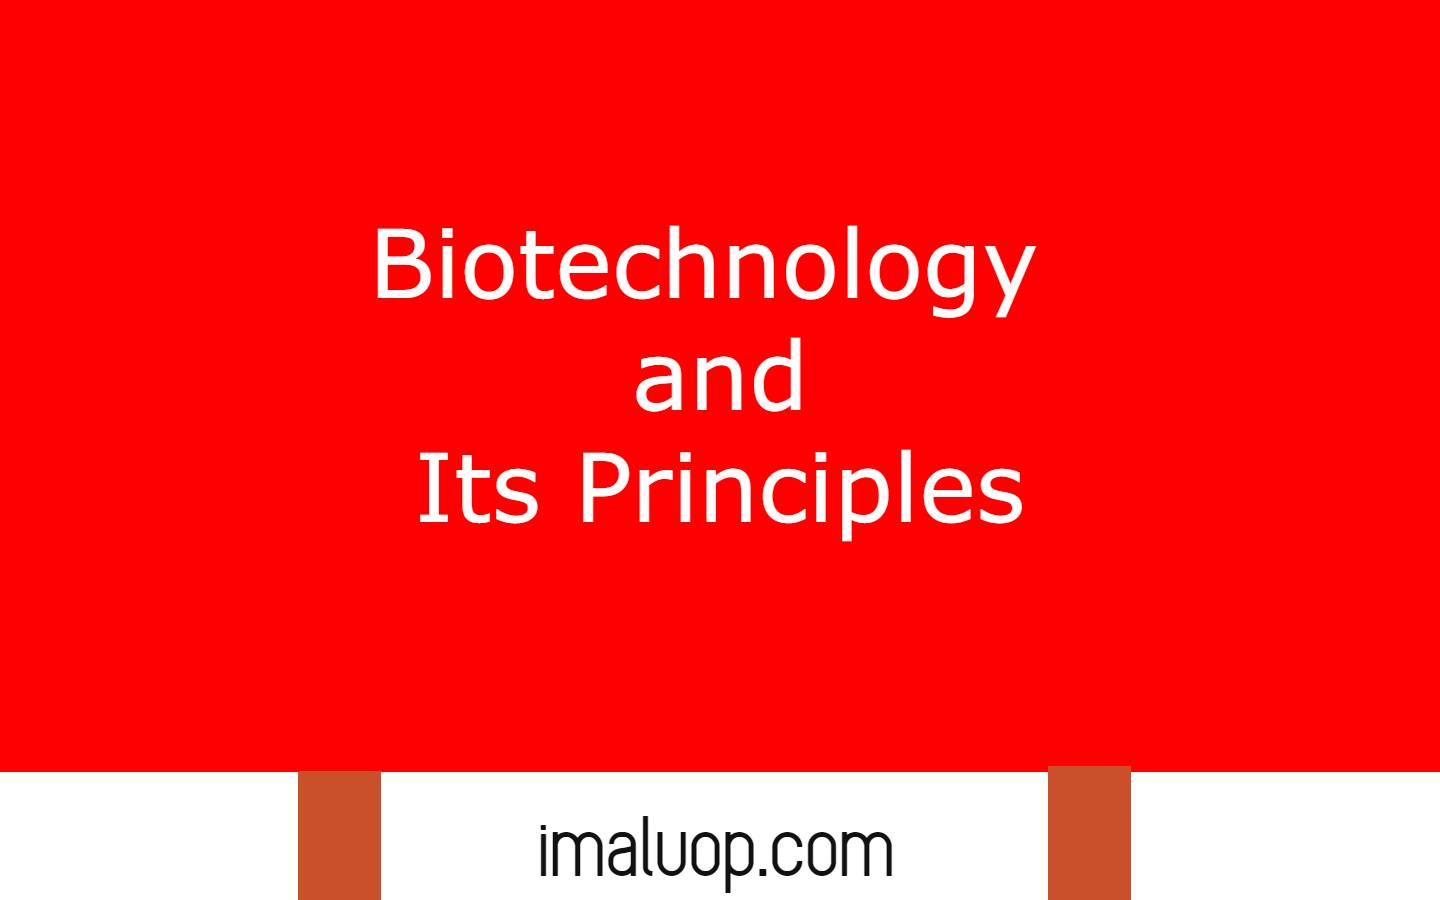 Biotechnology and its Principles